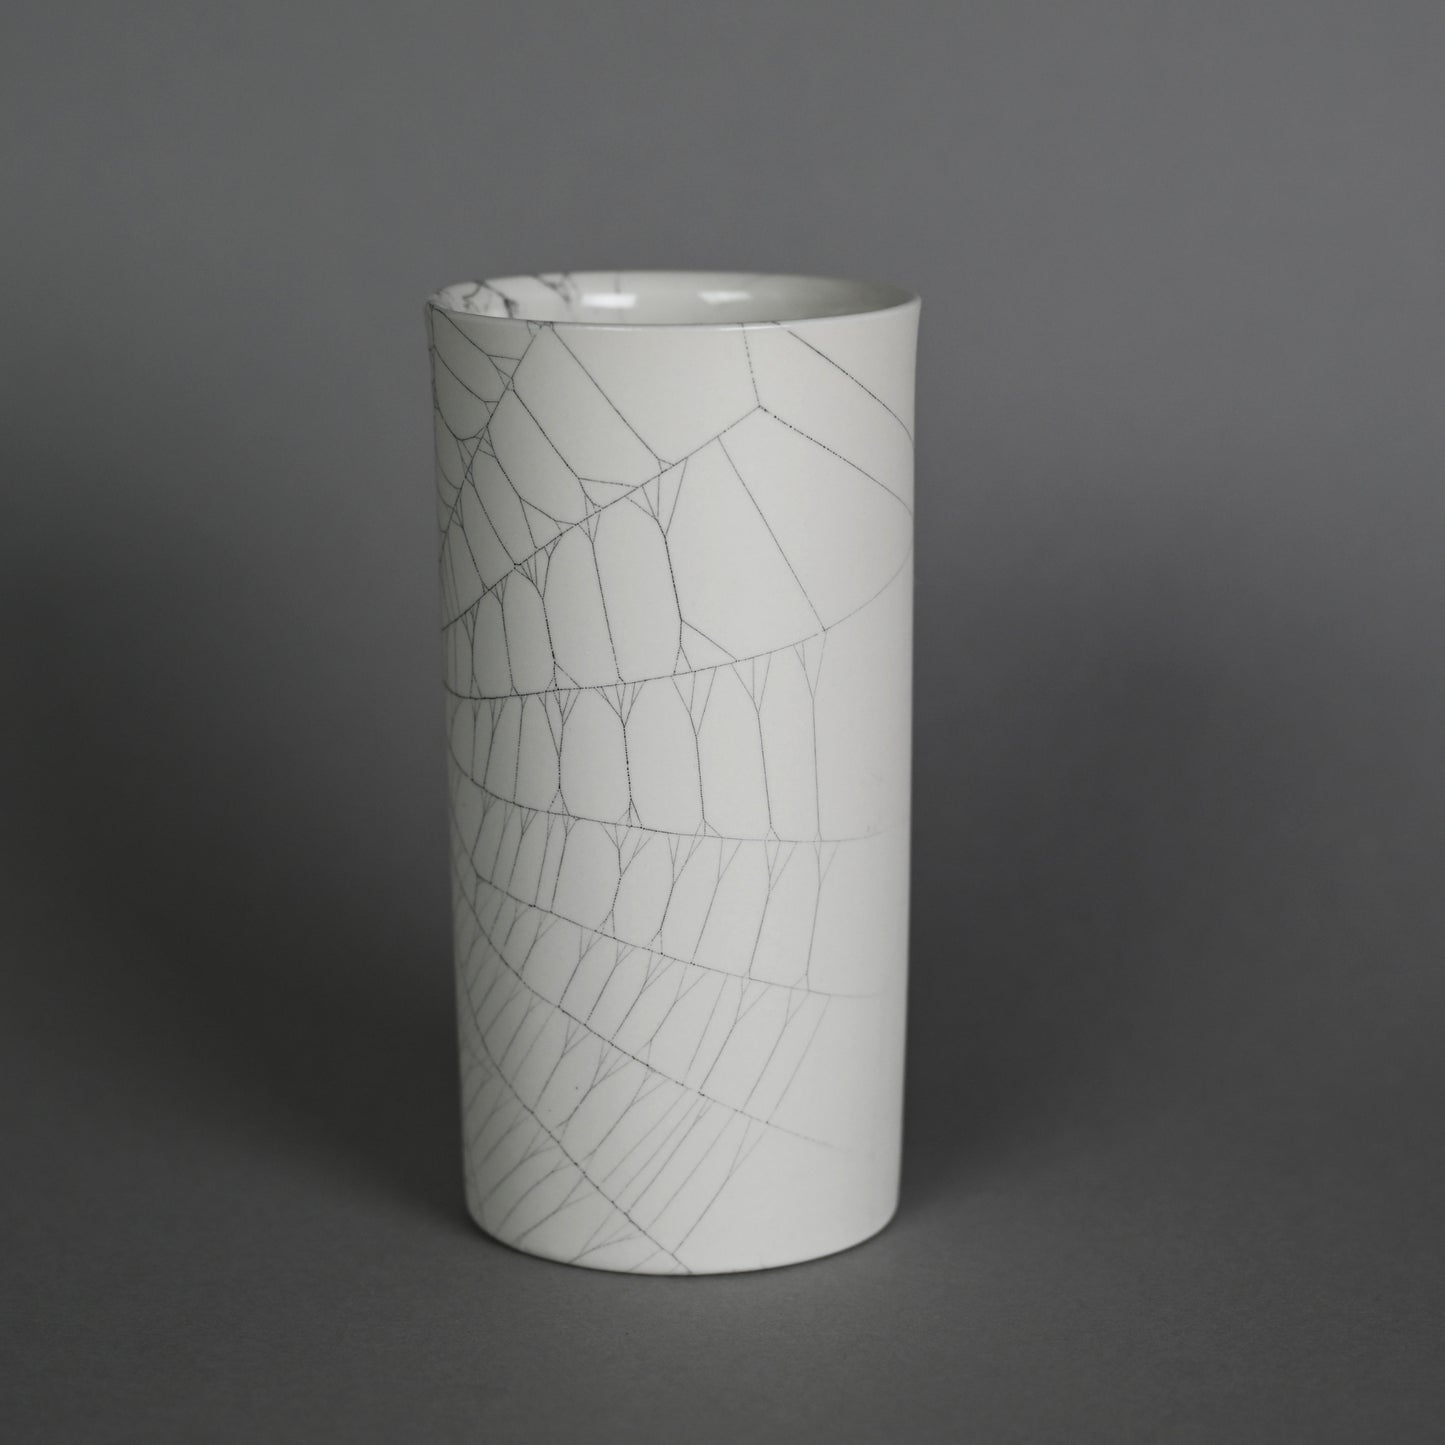 Web on Clay (190), Collected September 24, 2022